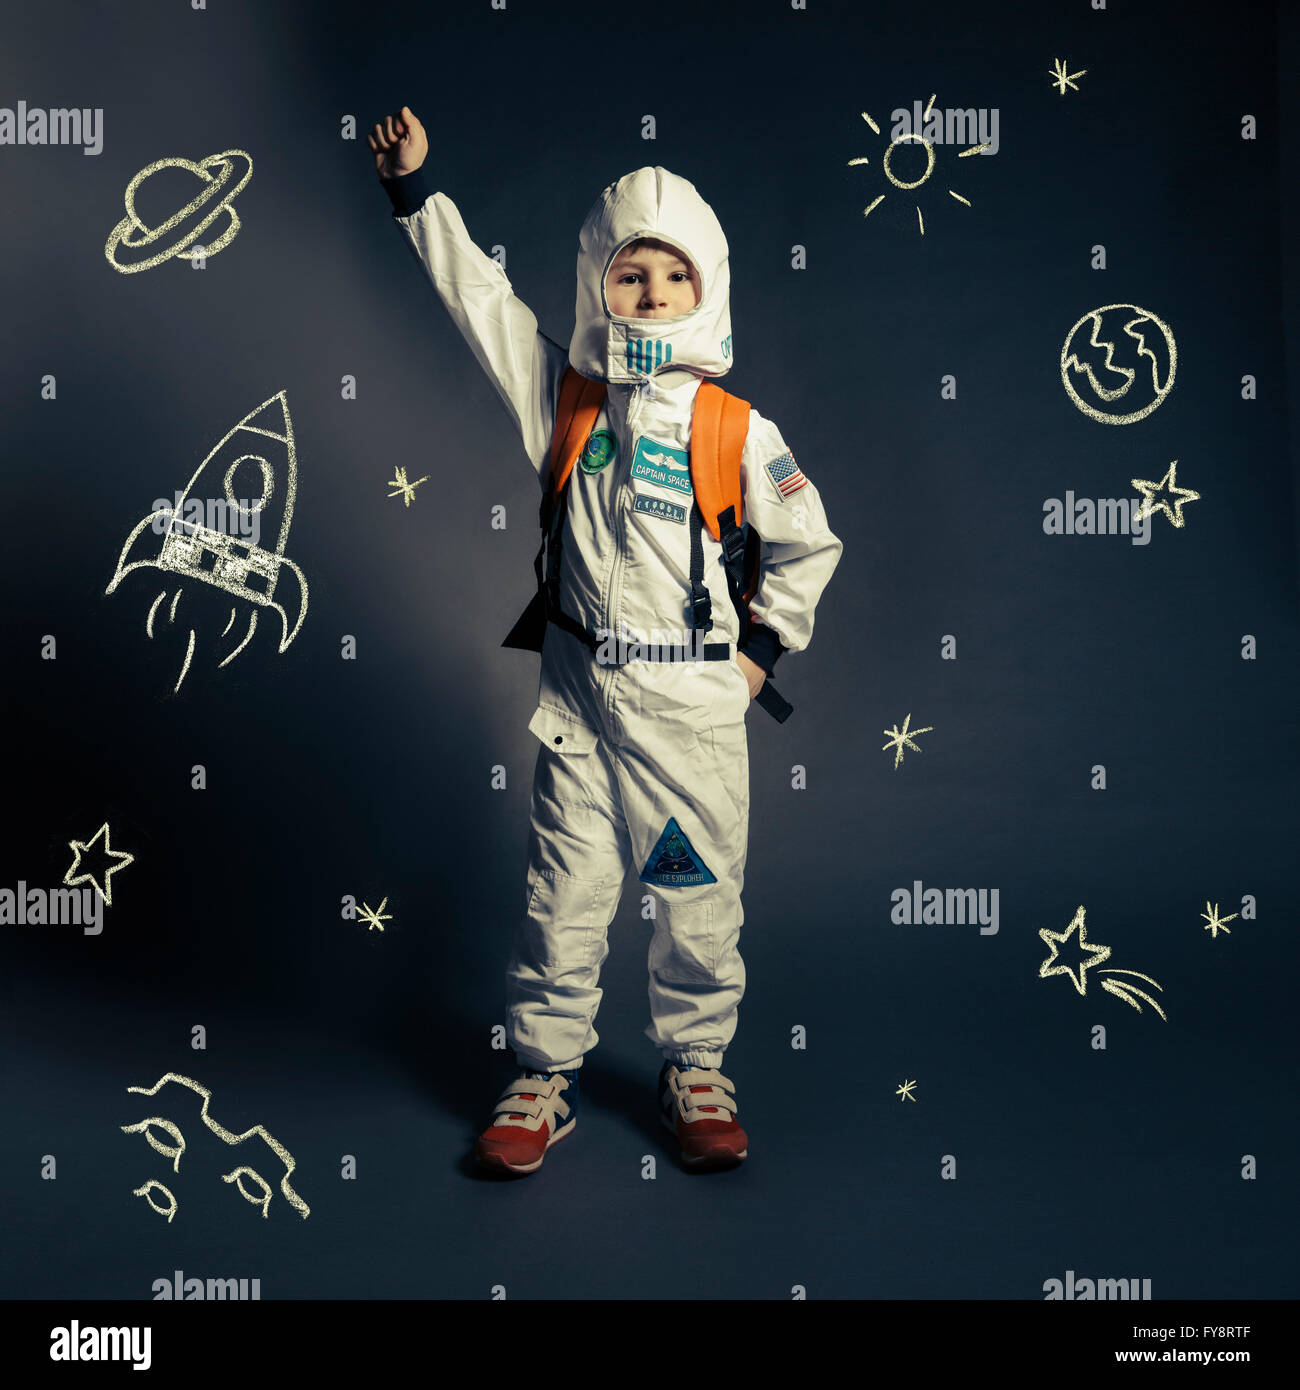 Child with spacesuit orbited by celestial bodies and luminaries Stock Photo